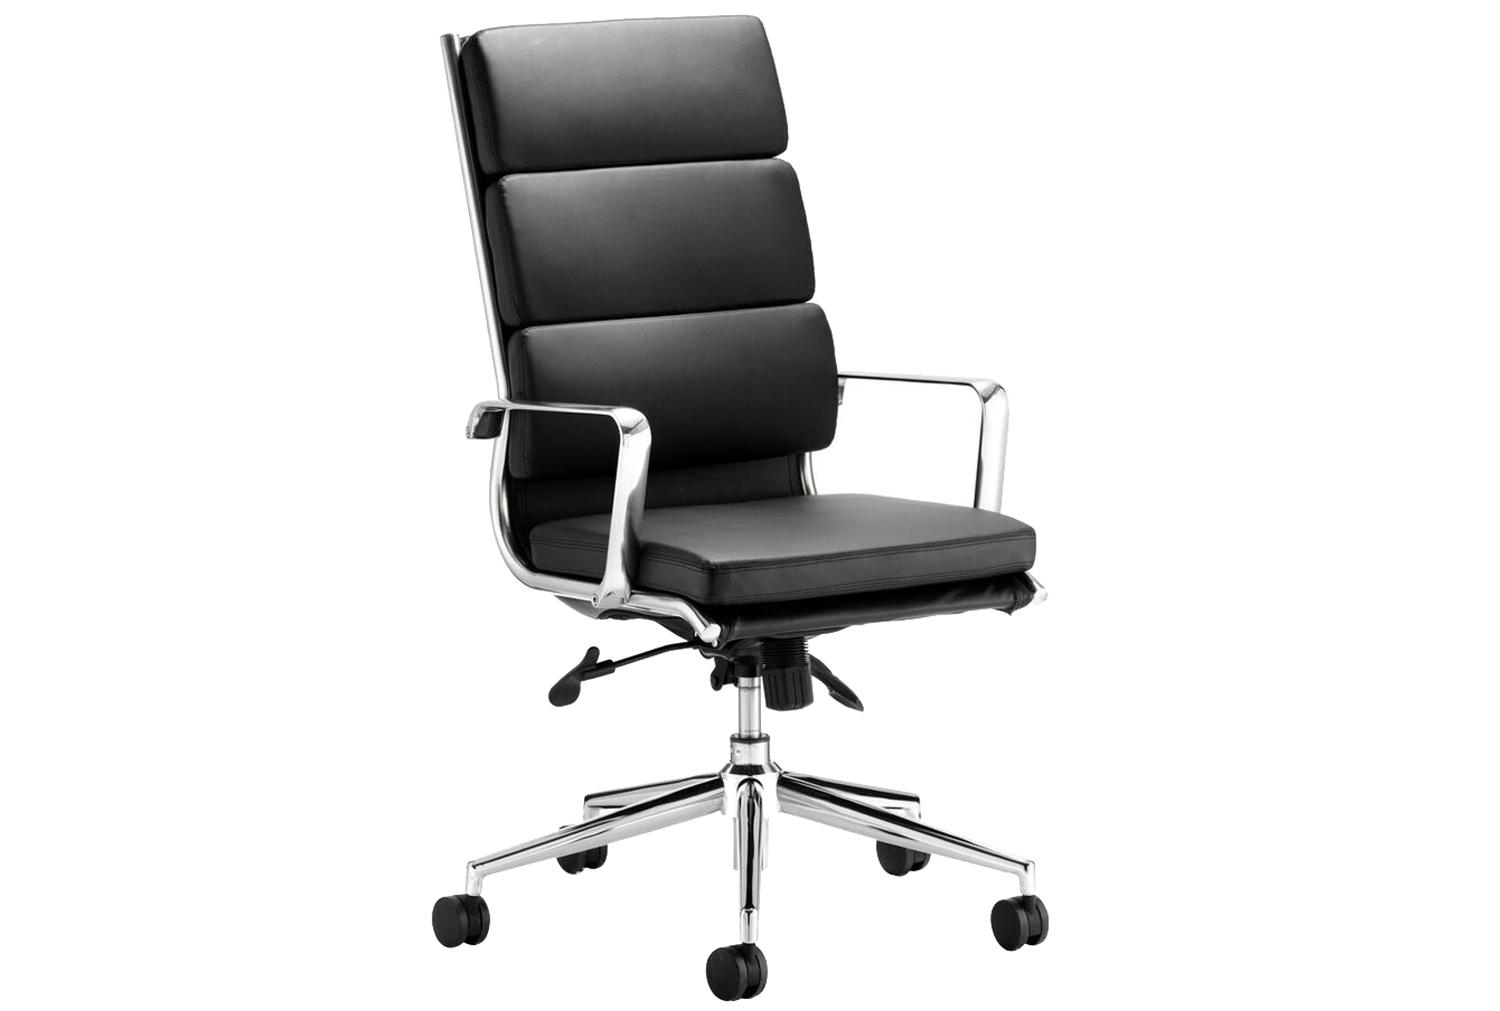 Formosa High Back Black Leather Faced Executive Office Chair, Black, Fully Installed